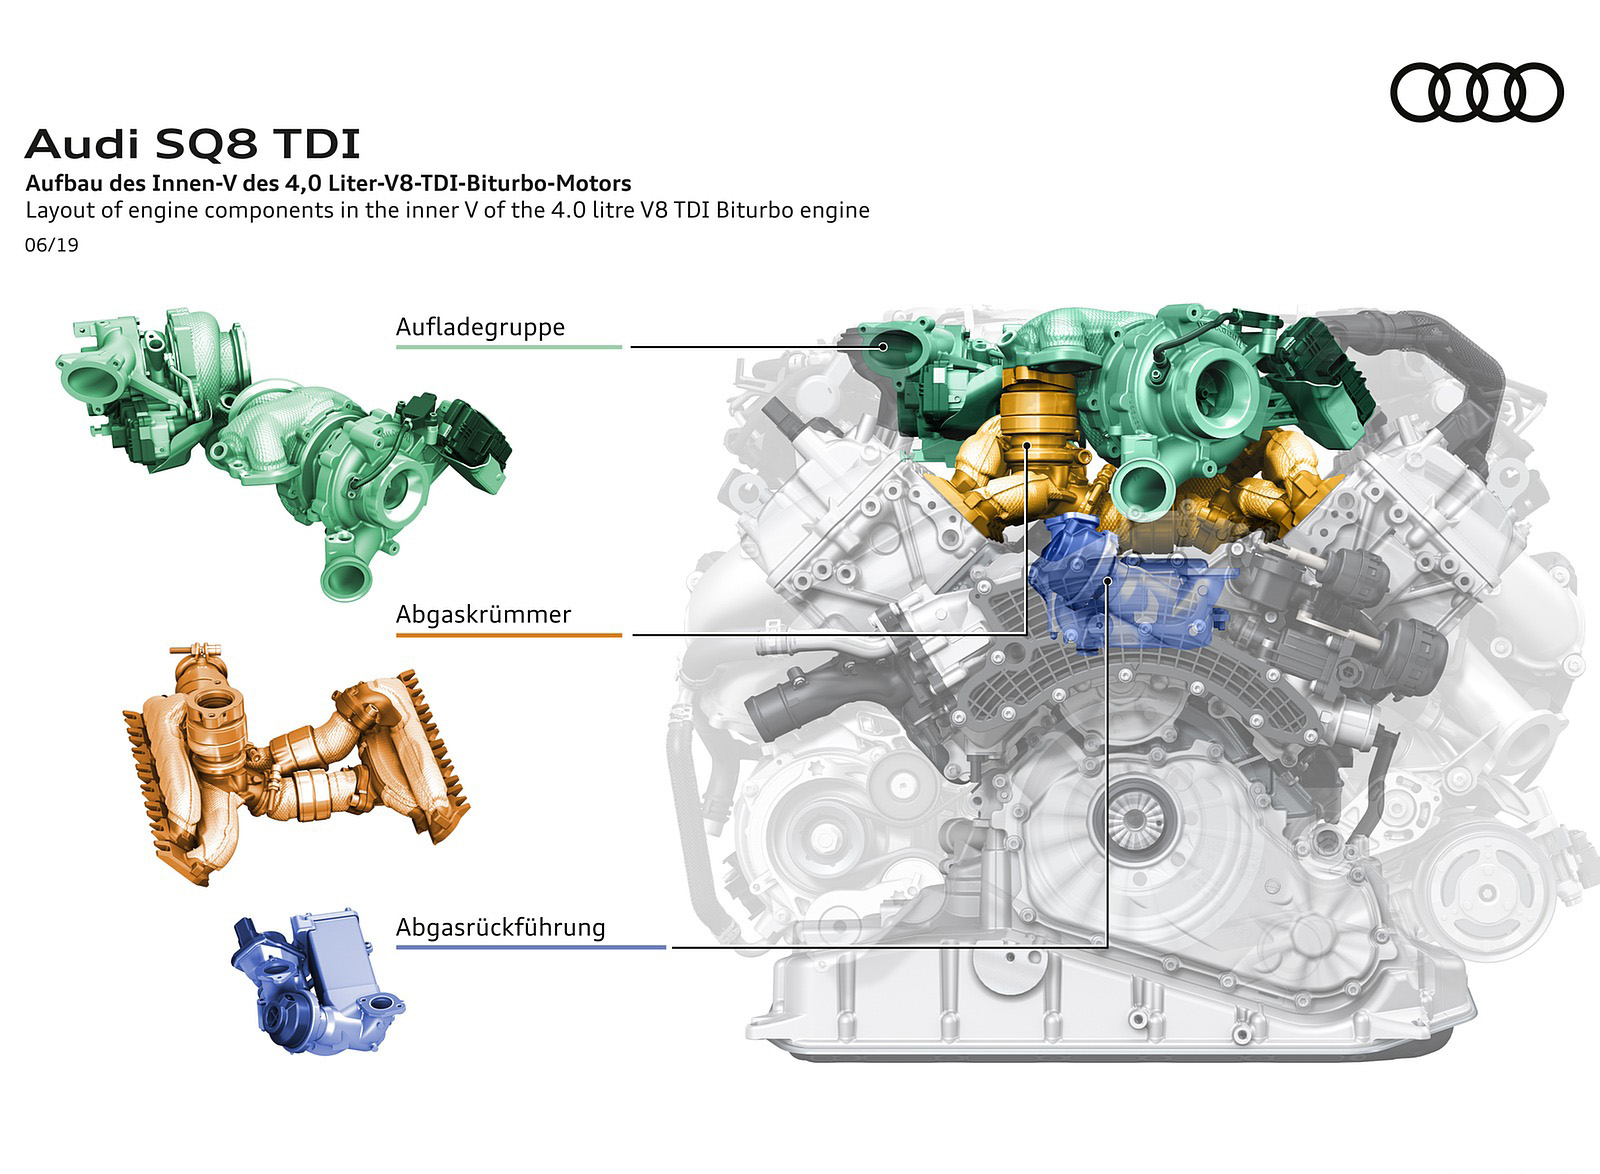 2020 Audi SQ8 TDI Layout of engine components in the inner V of the 4.0 litre V8 TDI Biturbo engine Wallpapers #67 of 140